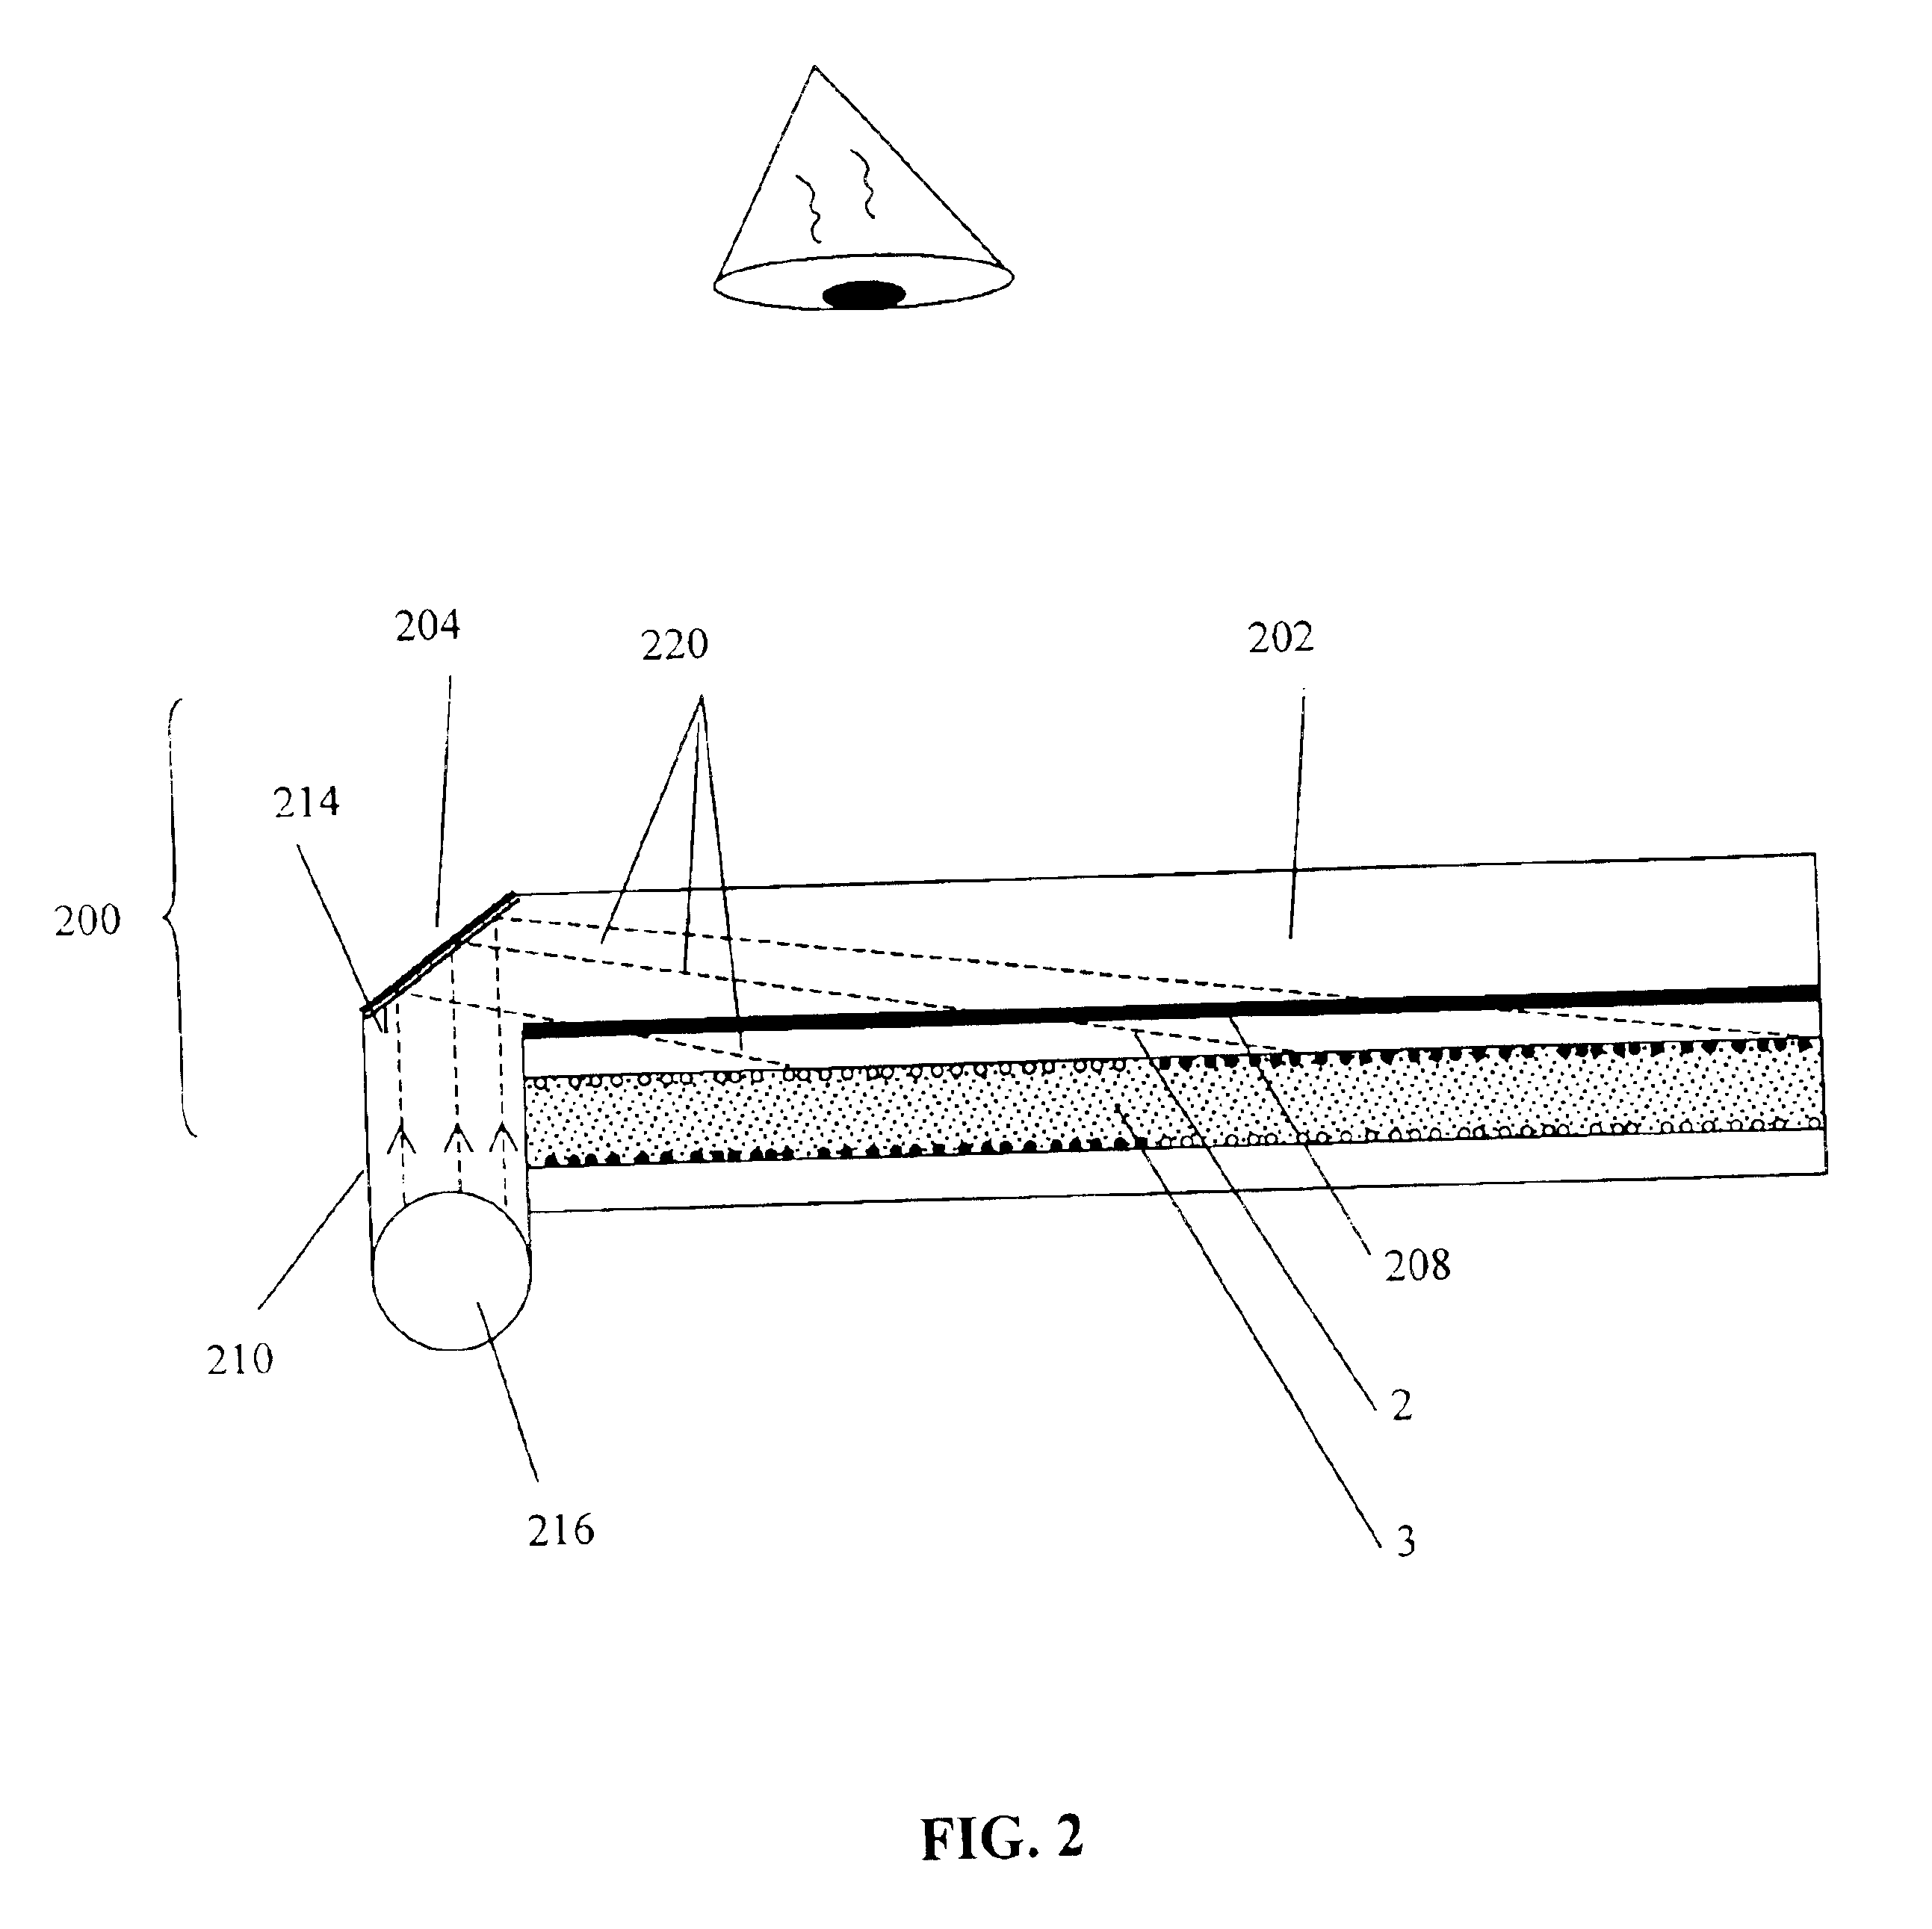 Illumination system for nonemissive electronic displays